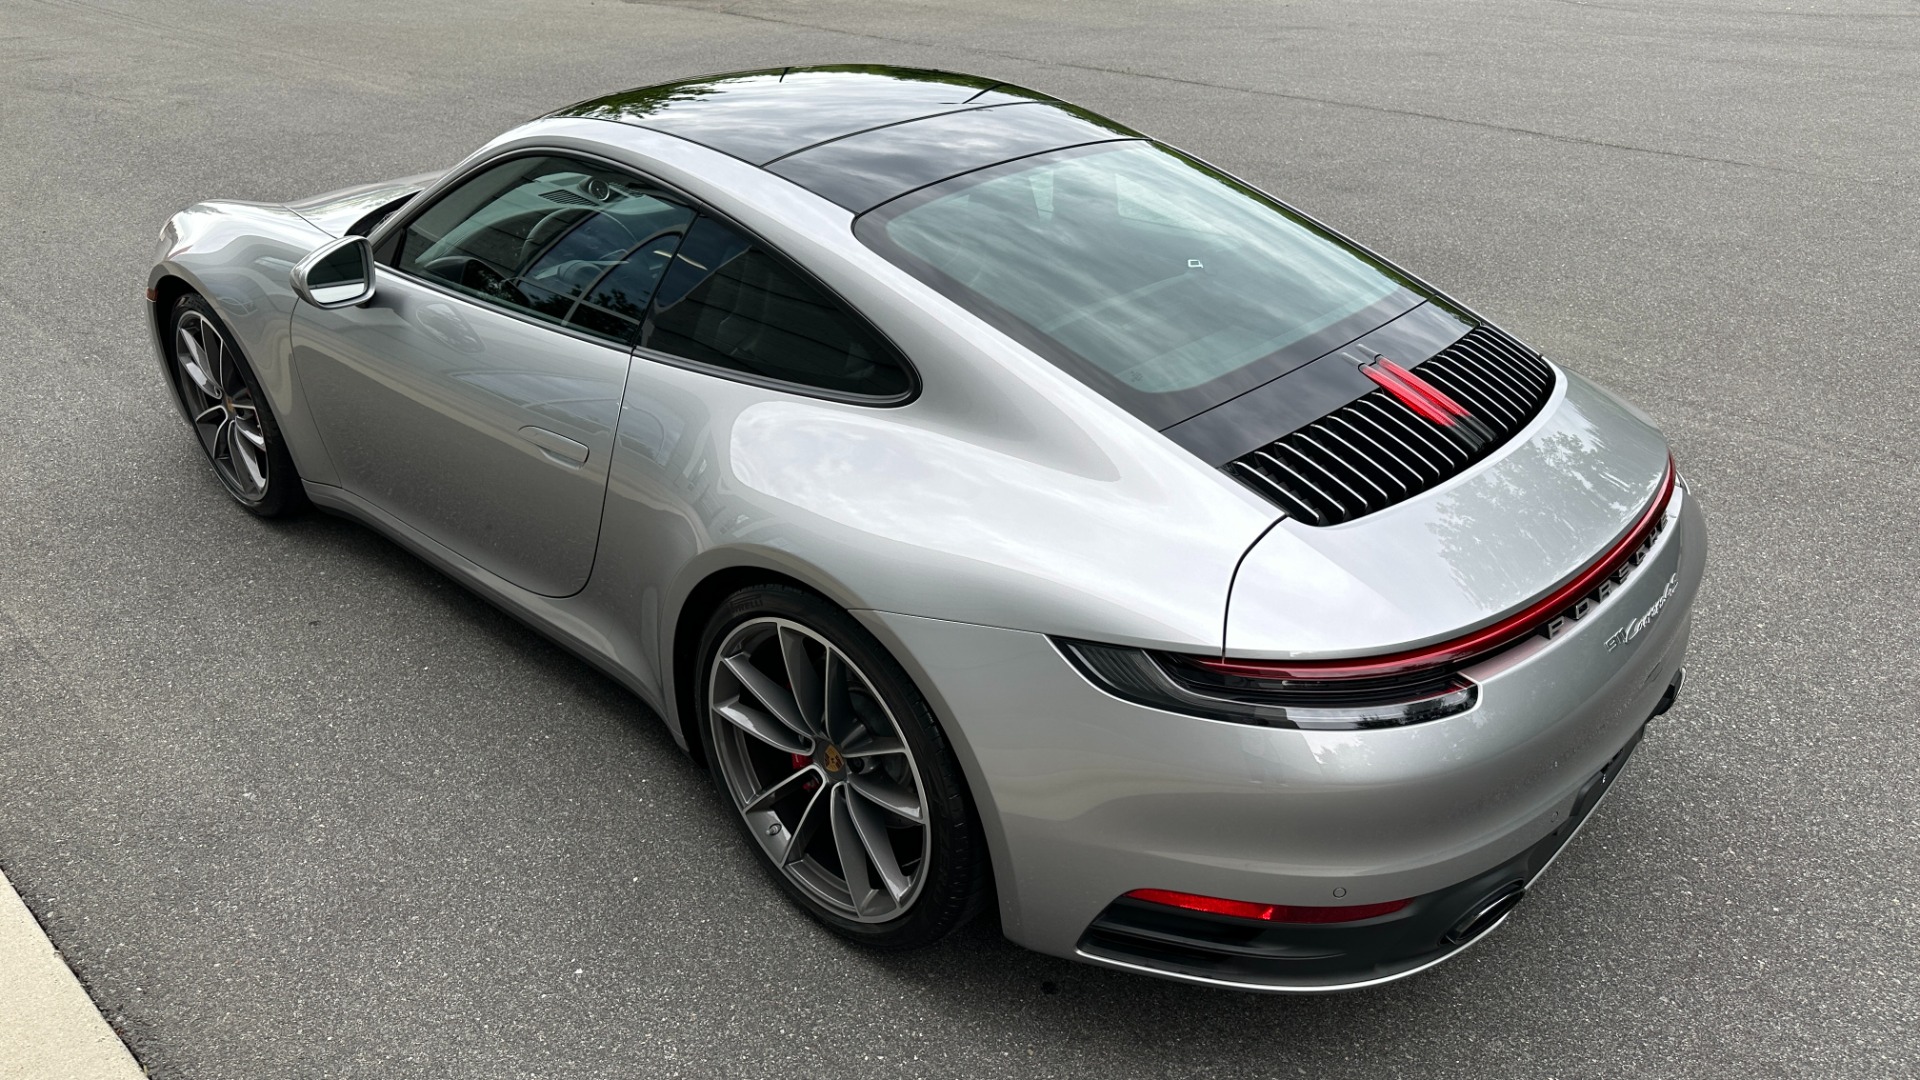 Used 2020 Porsche 911 CARRERA 4S / SPORT PACKAGE / PDLS+ LIGHTS / BOSE / SPORT EXHAUST for sale $144,995 at Formula Imports in Charlotte NC 28227 4